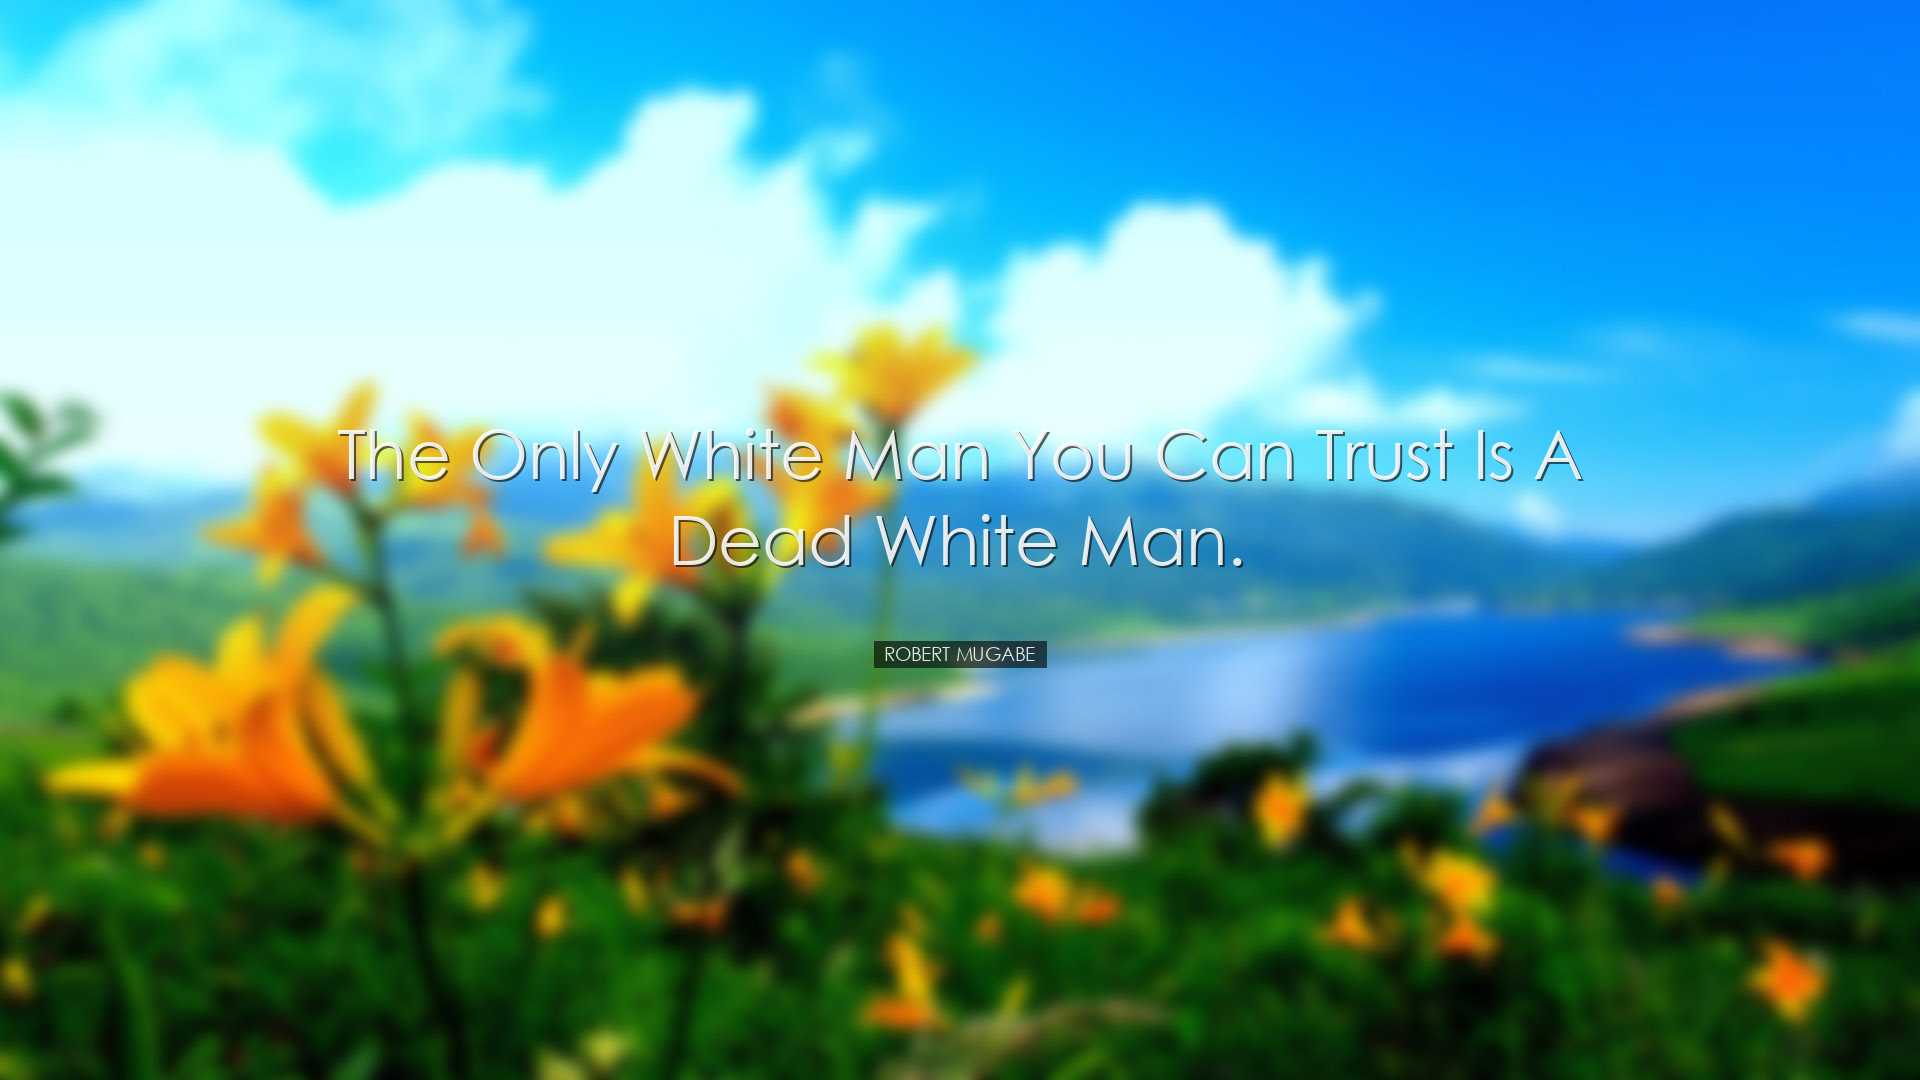 The only white man you can trust is a dead white man. - Robert Mug